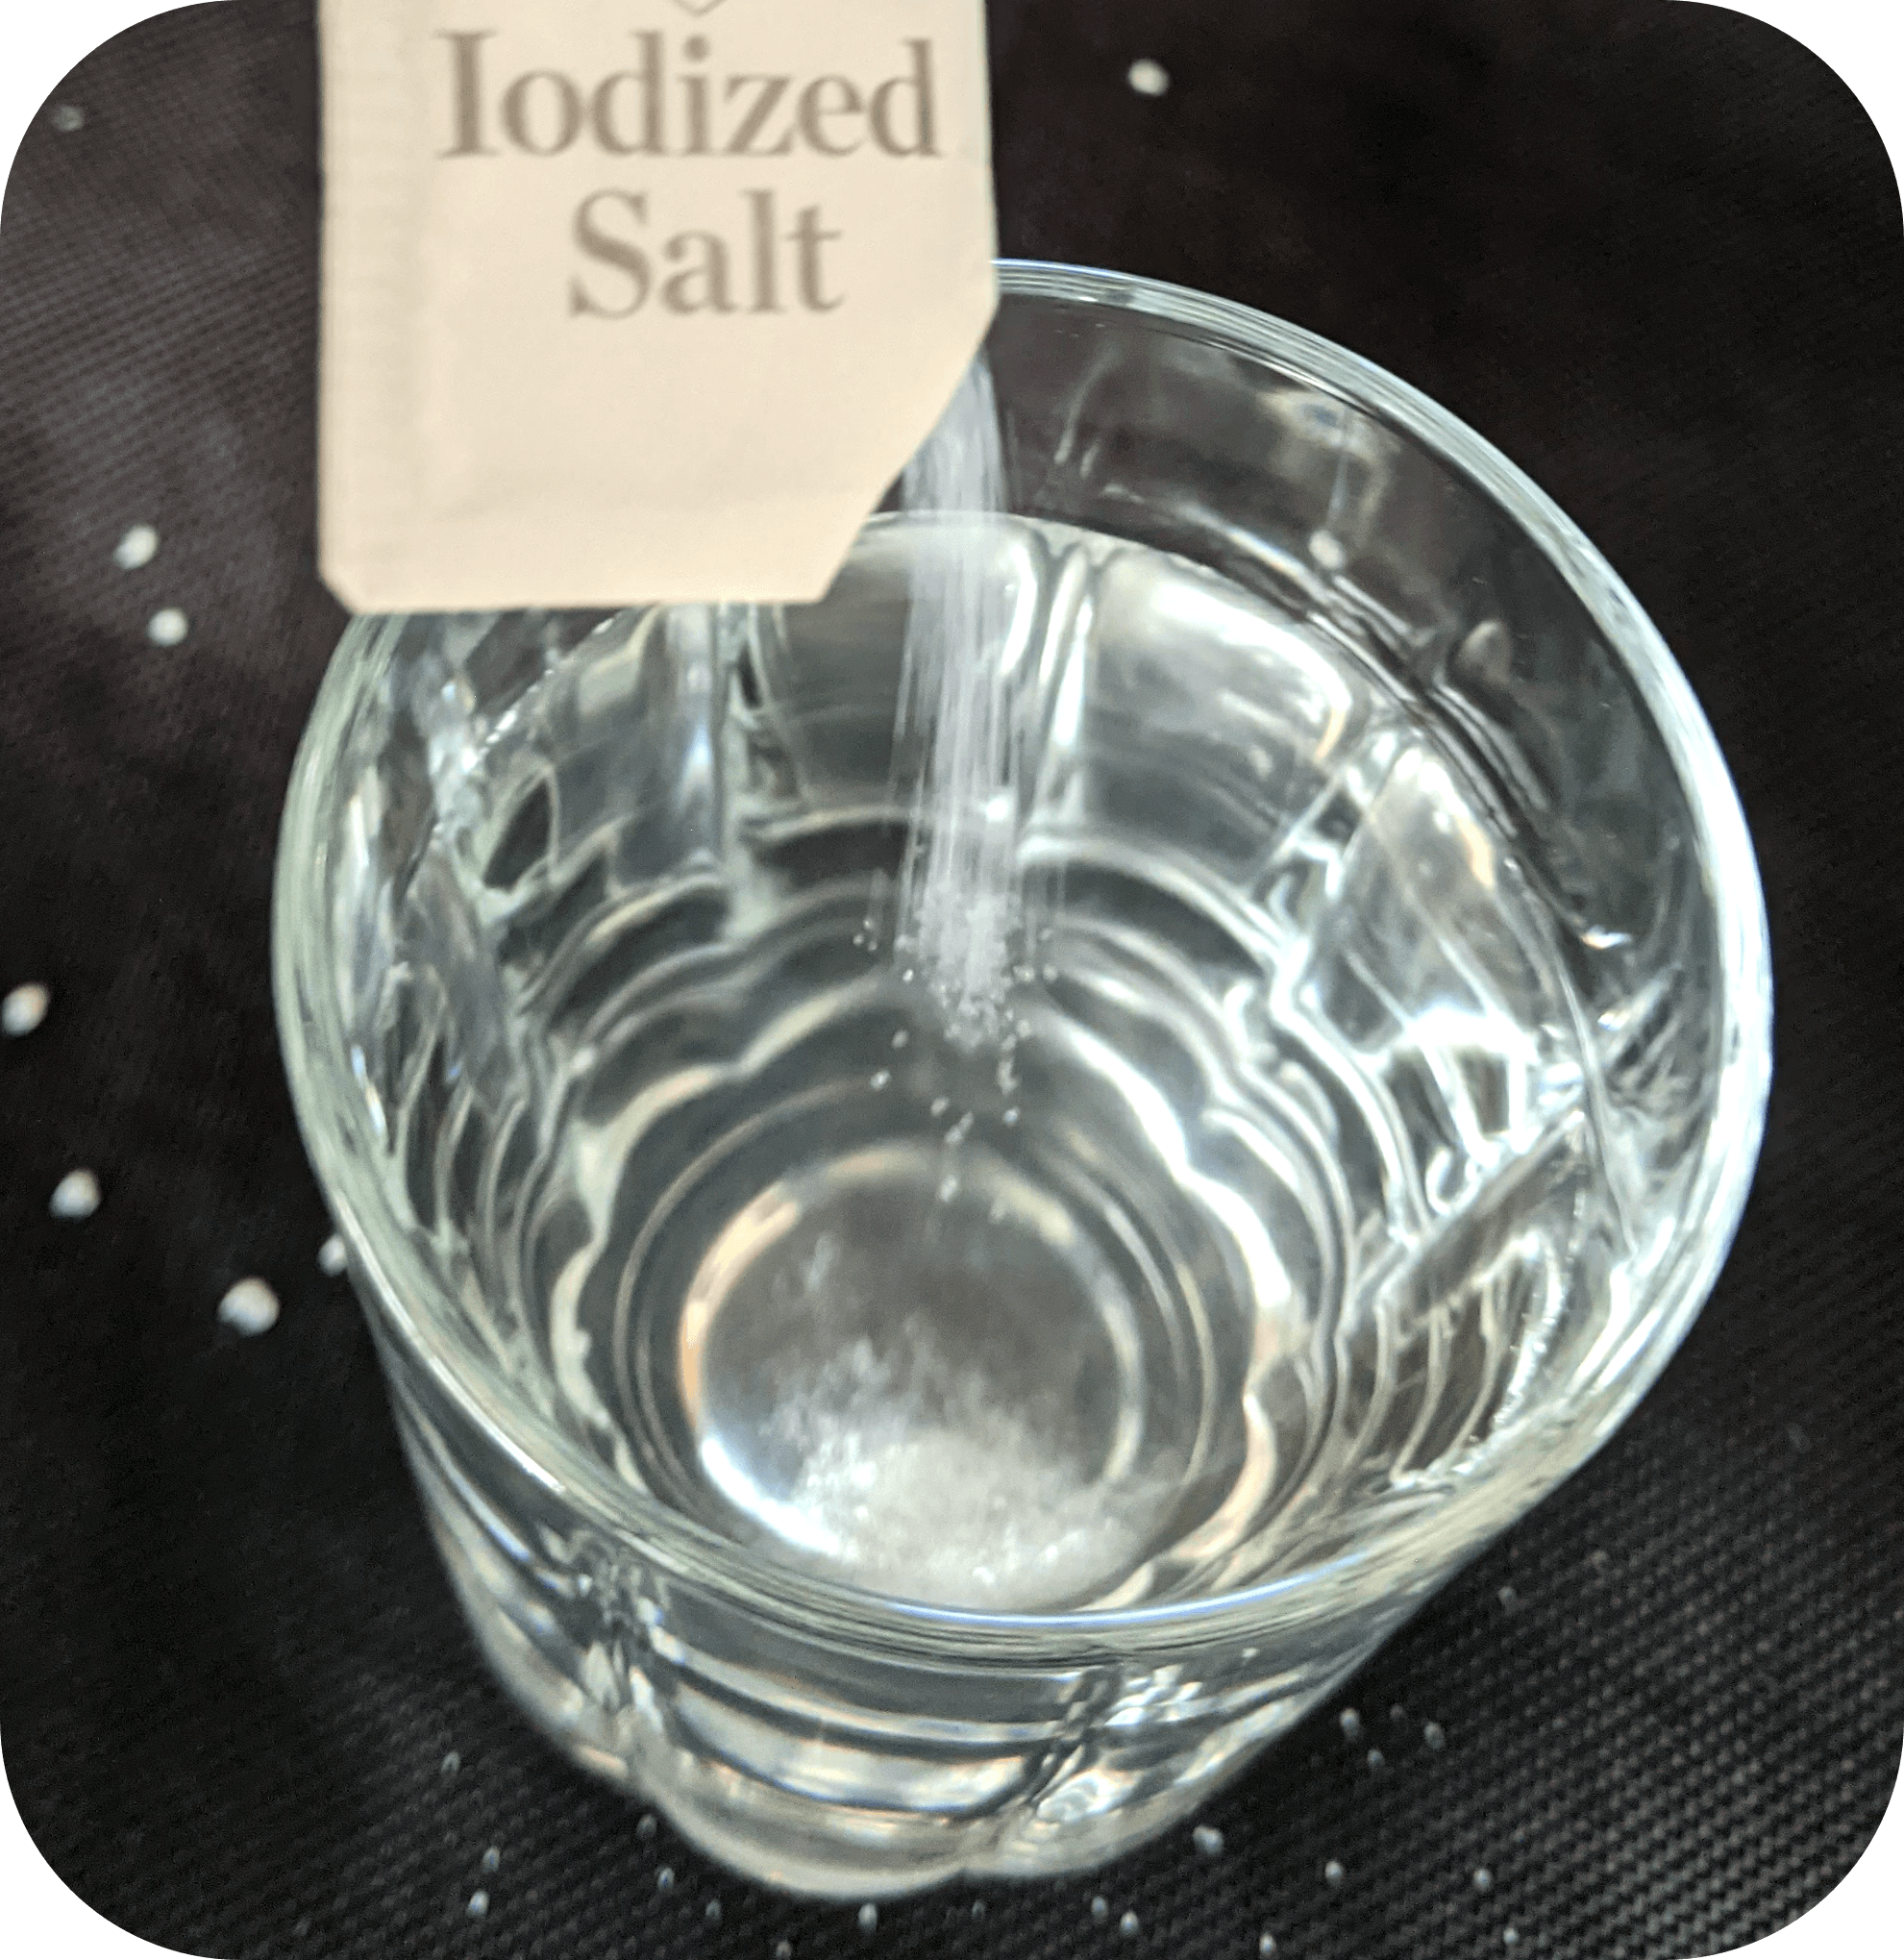 Iodized Salt mixed with water in a glass cup.